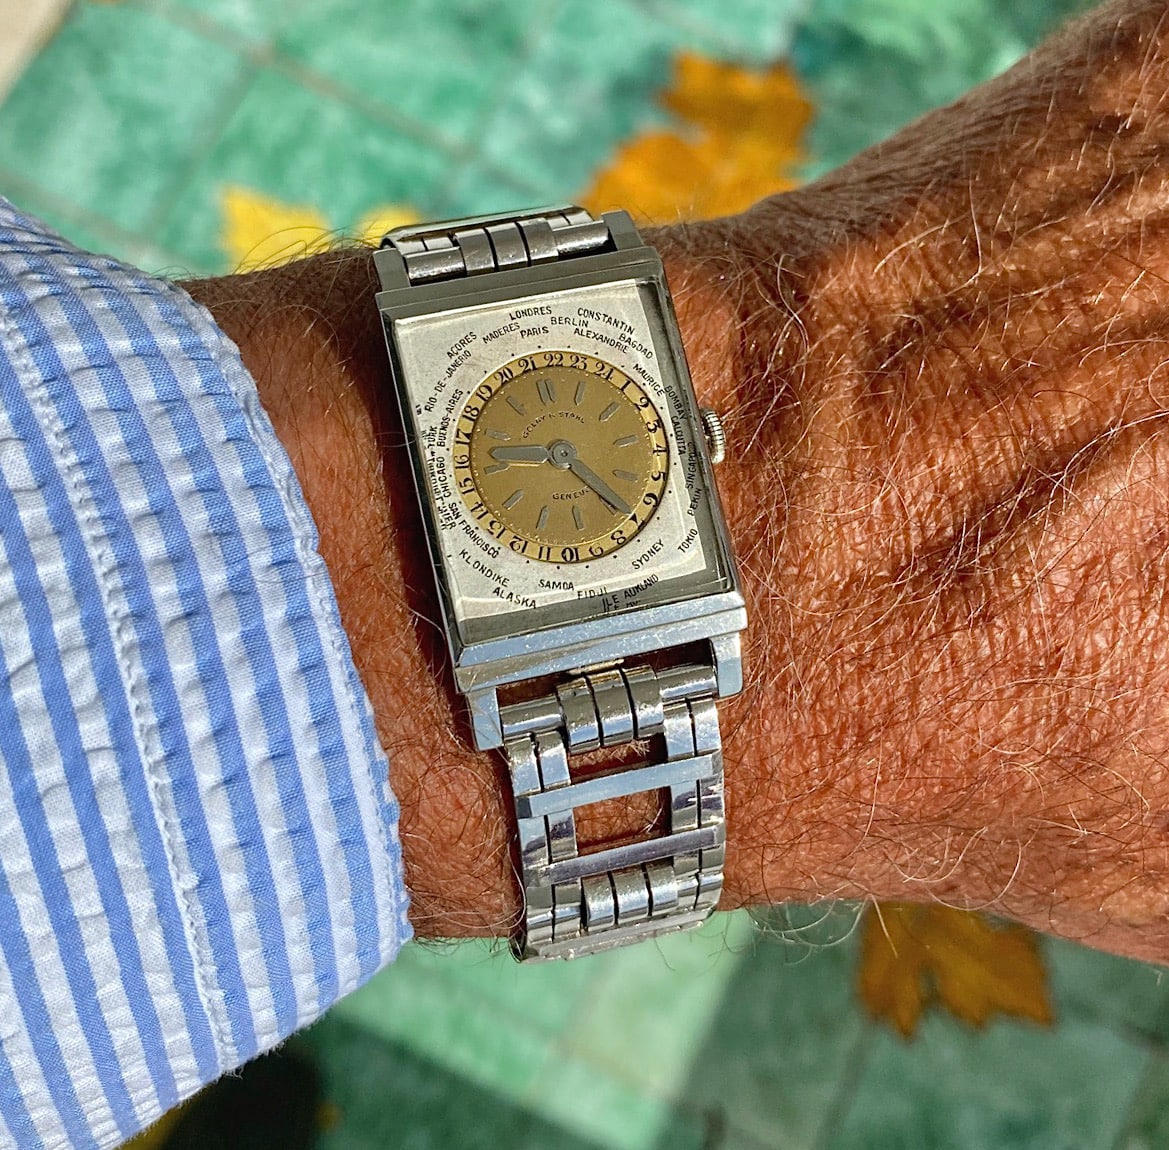 Why Louis Cottier is the Father of World Time Wristwatches